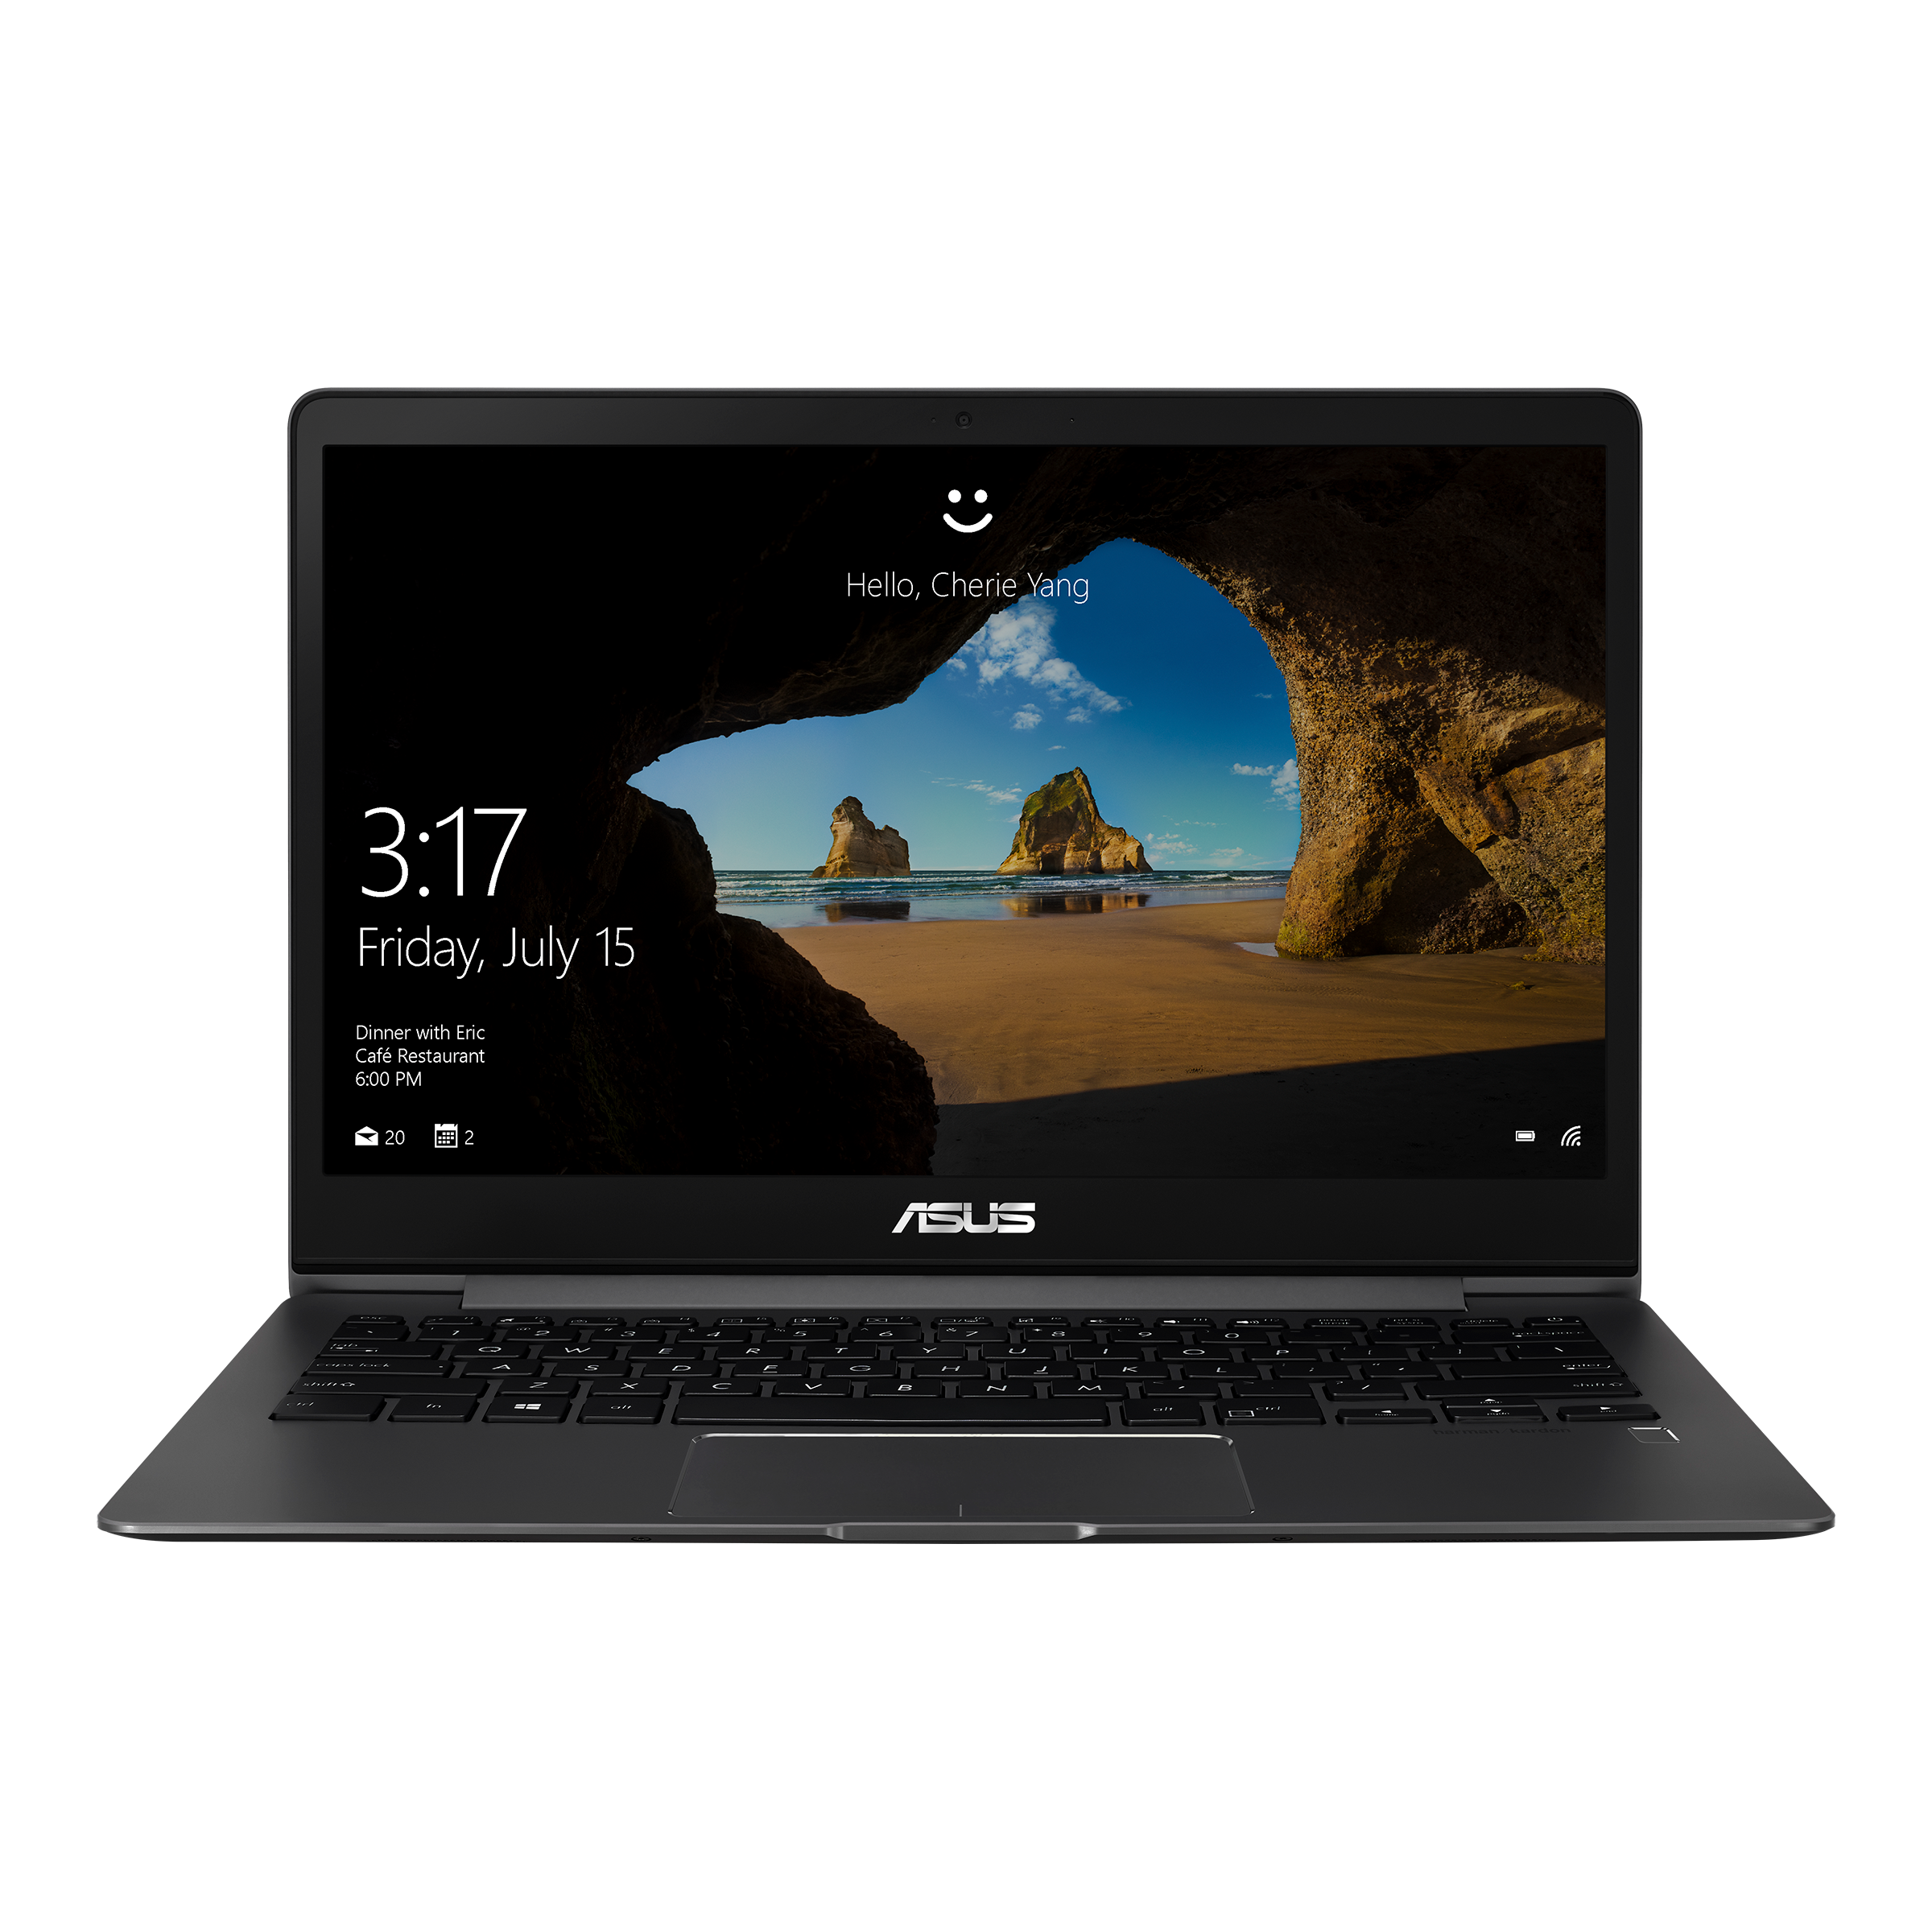 ASUS Zenbook 13 UX331｜Laptops For Home｜ASUS USA